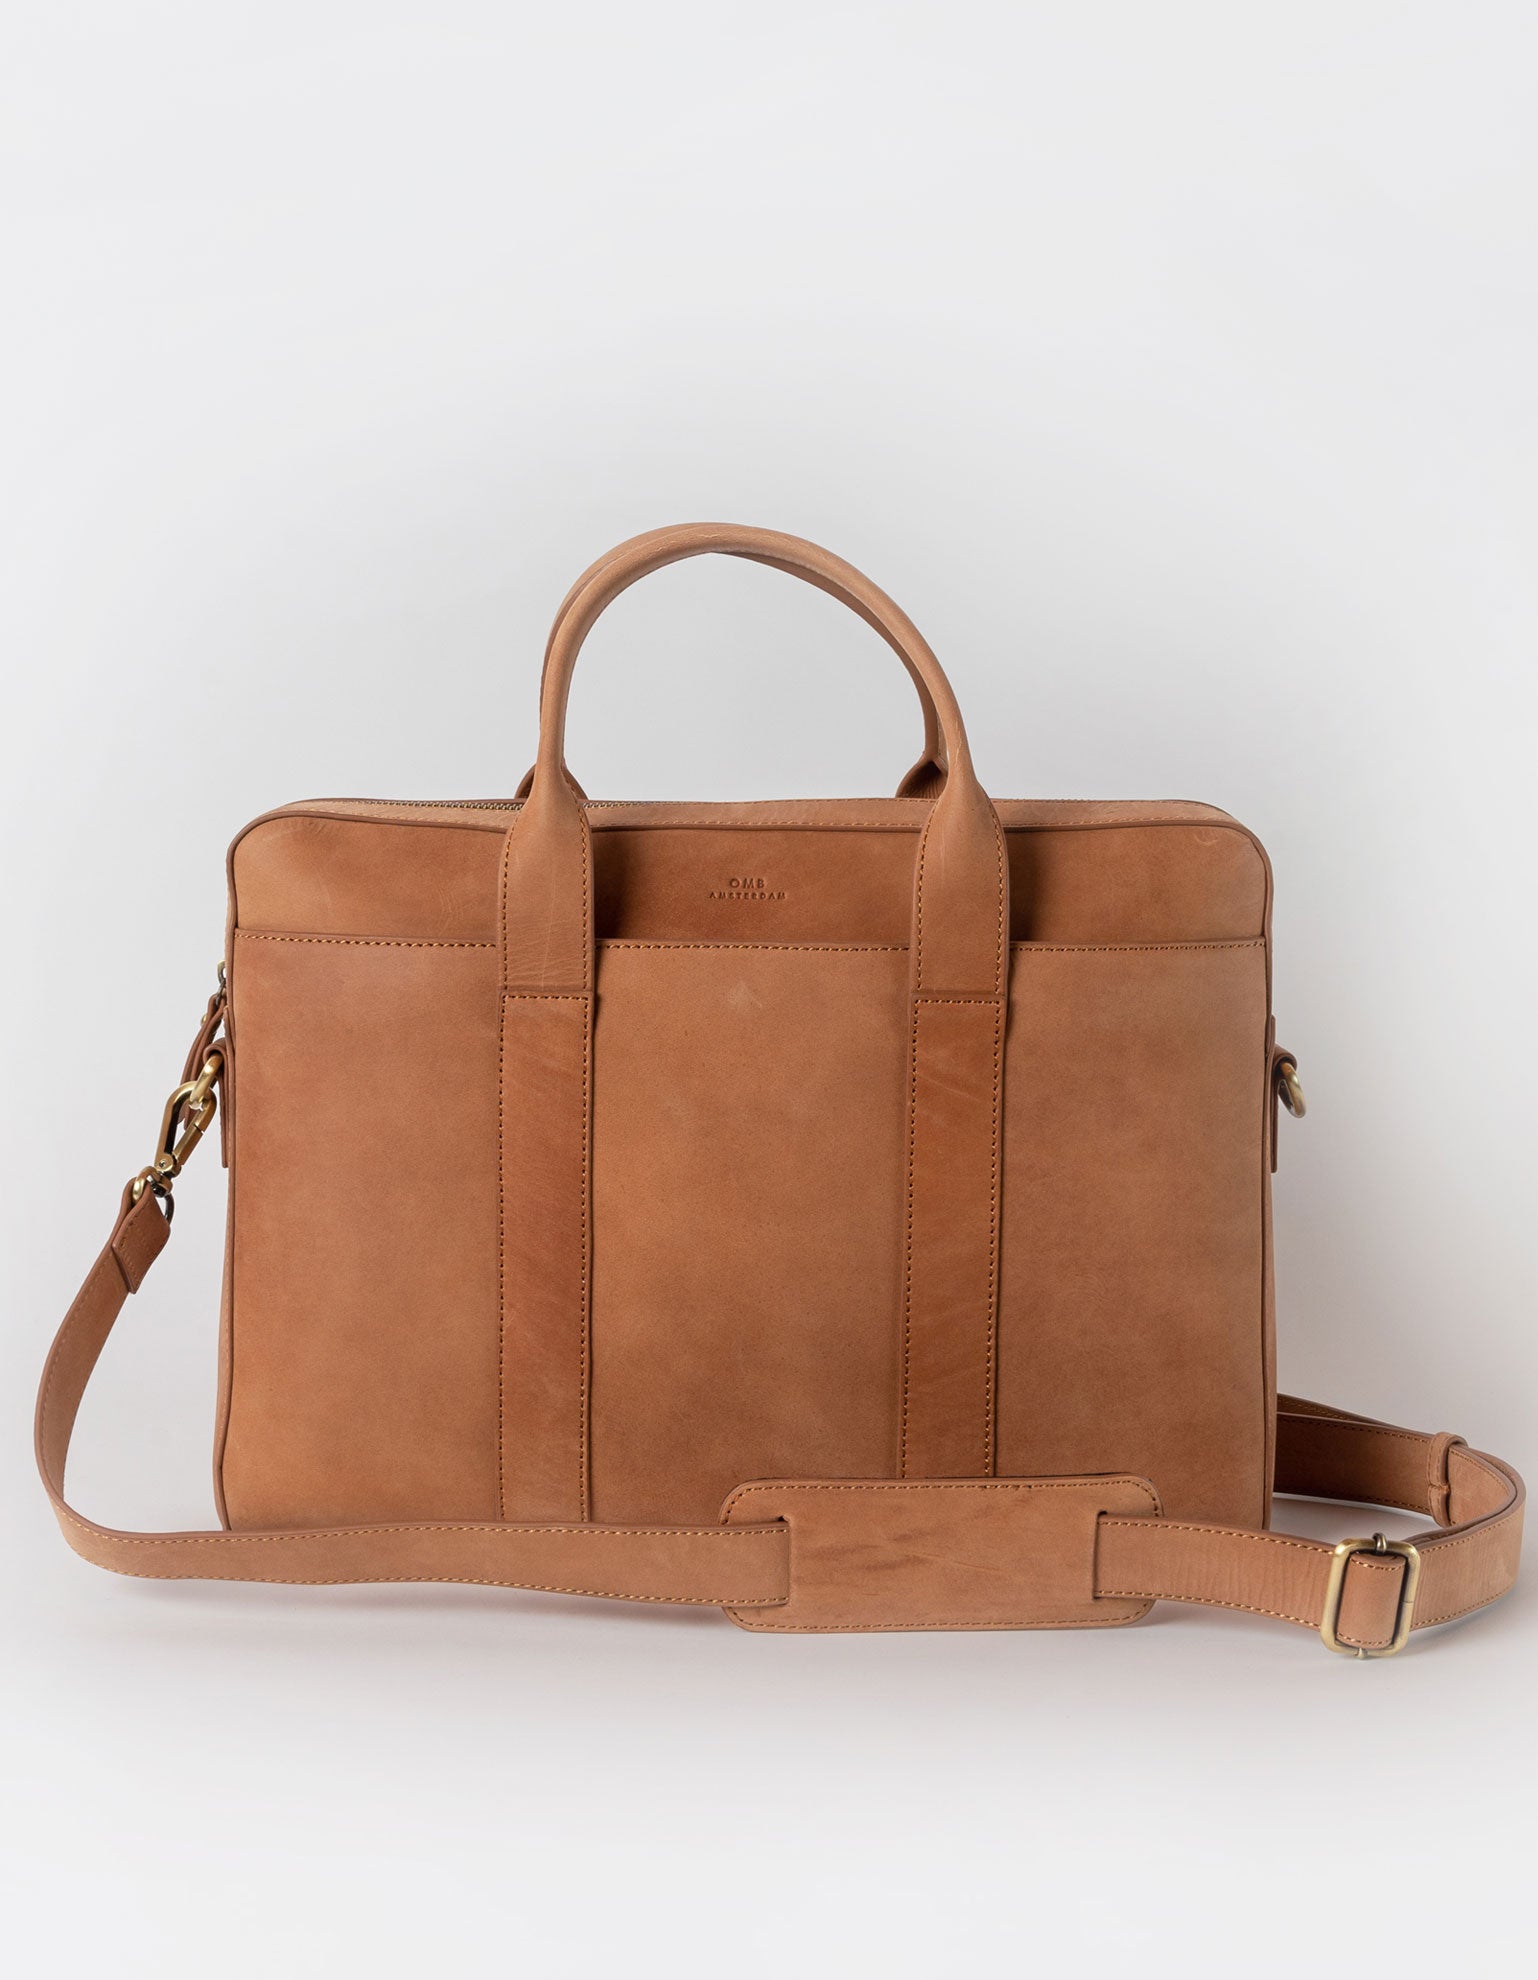 Harvey work bag in camel hunter leather. Front product image with adjustable leather strap.